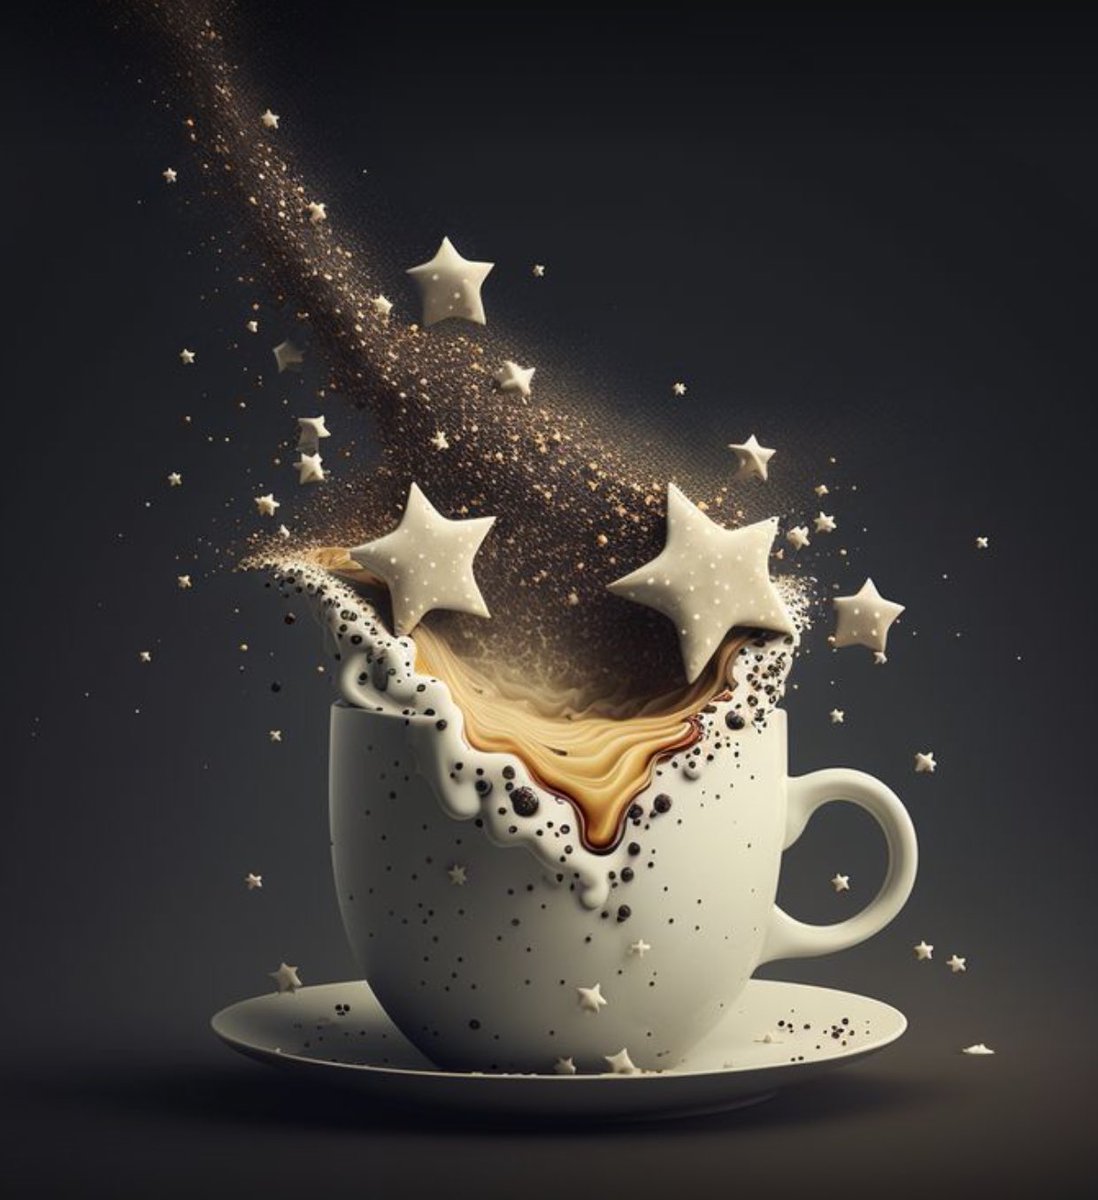 ☕️☕️☕️ It’s still magic even if you know how it’s done. . . #Coffee @Cbp8Cindy @QueenBeanCoffee @suziday123 @LoveCoffeeHour @FreshRoasters @Stefeenew #coffeeaddict #CoffeeLovers #CoffeeLover #coffeeTime #CoffeeTalk #CoffeeShop #CoffeeCulture #CoffeeCup #CoffeeKings